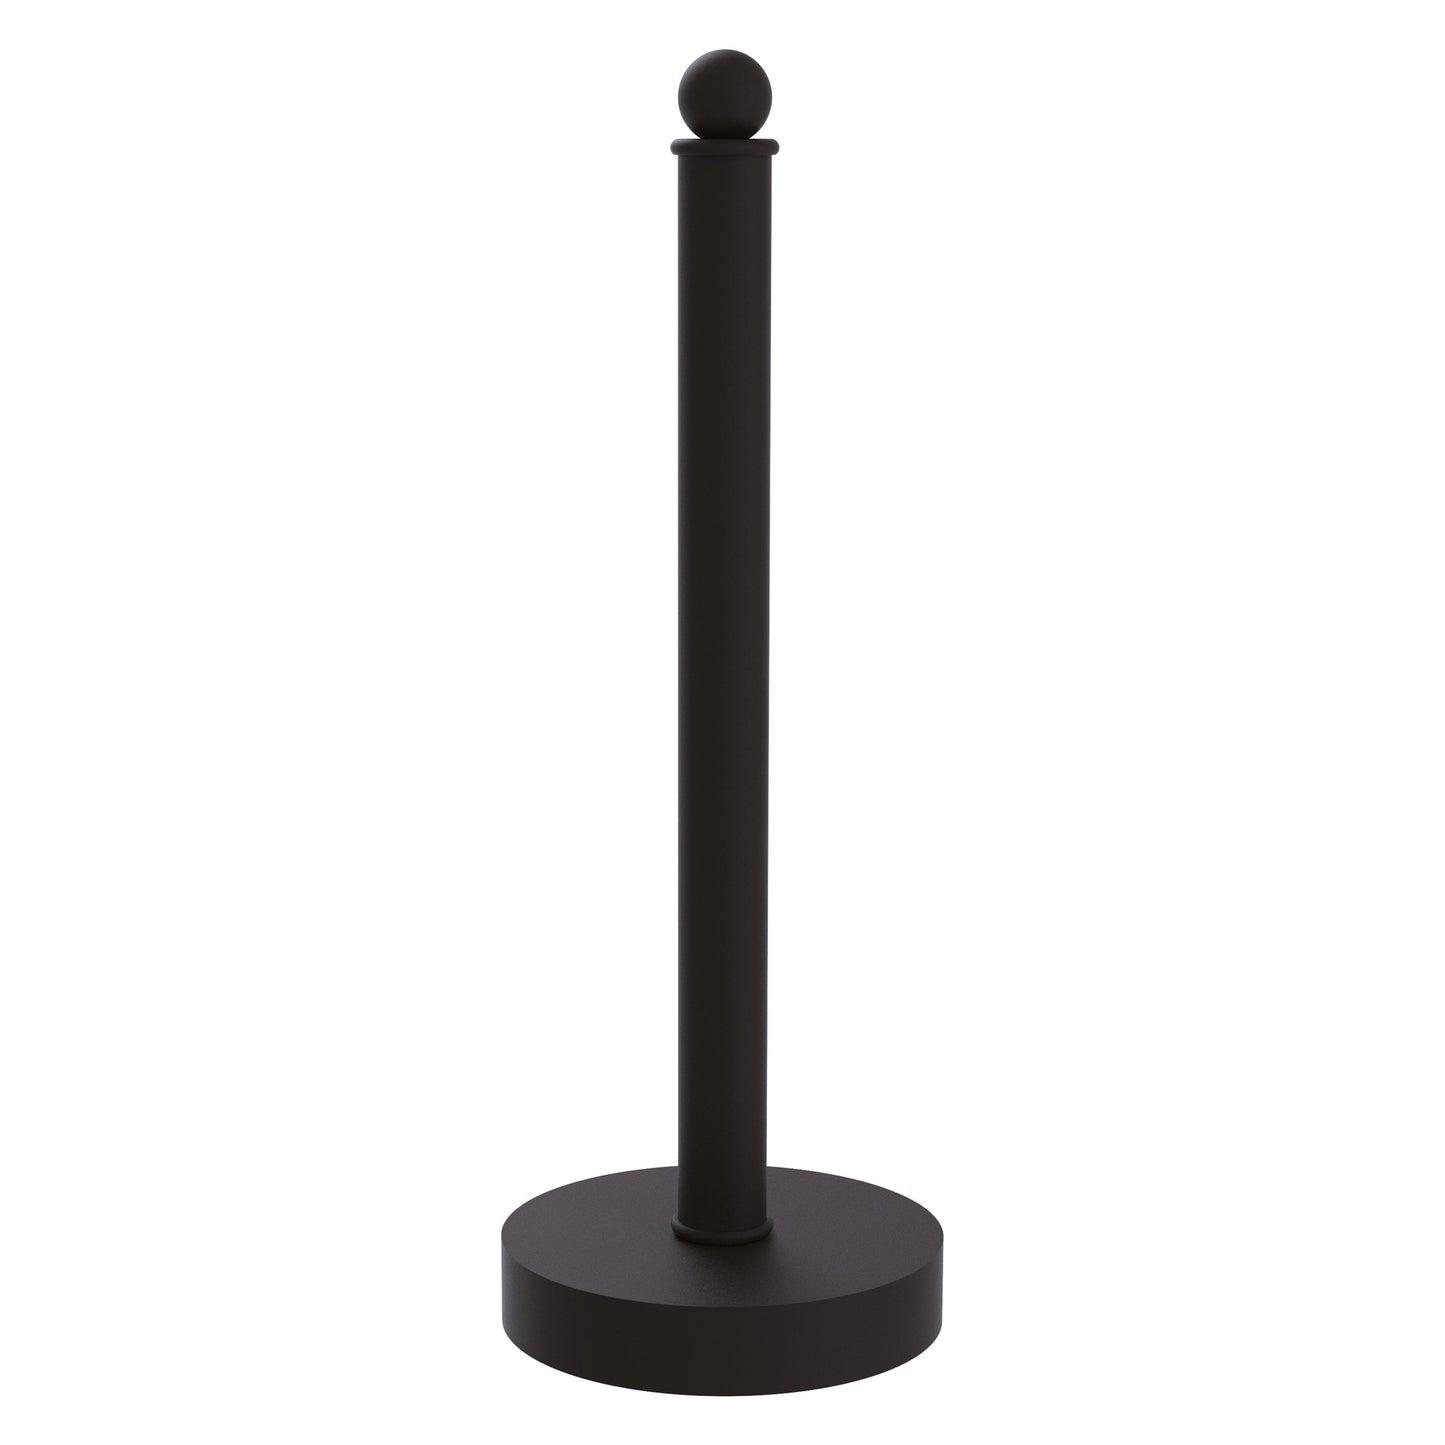 Allied Brass 1051 5" Oil Rubbed Bronze Solid Brass Paper Towel Holder